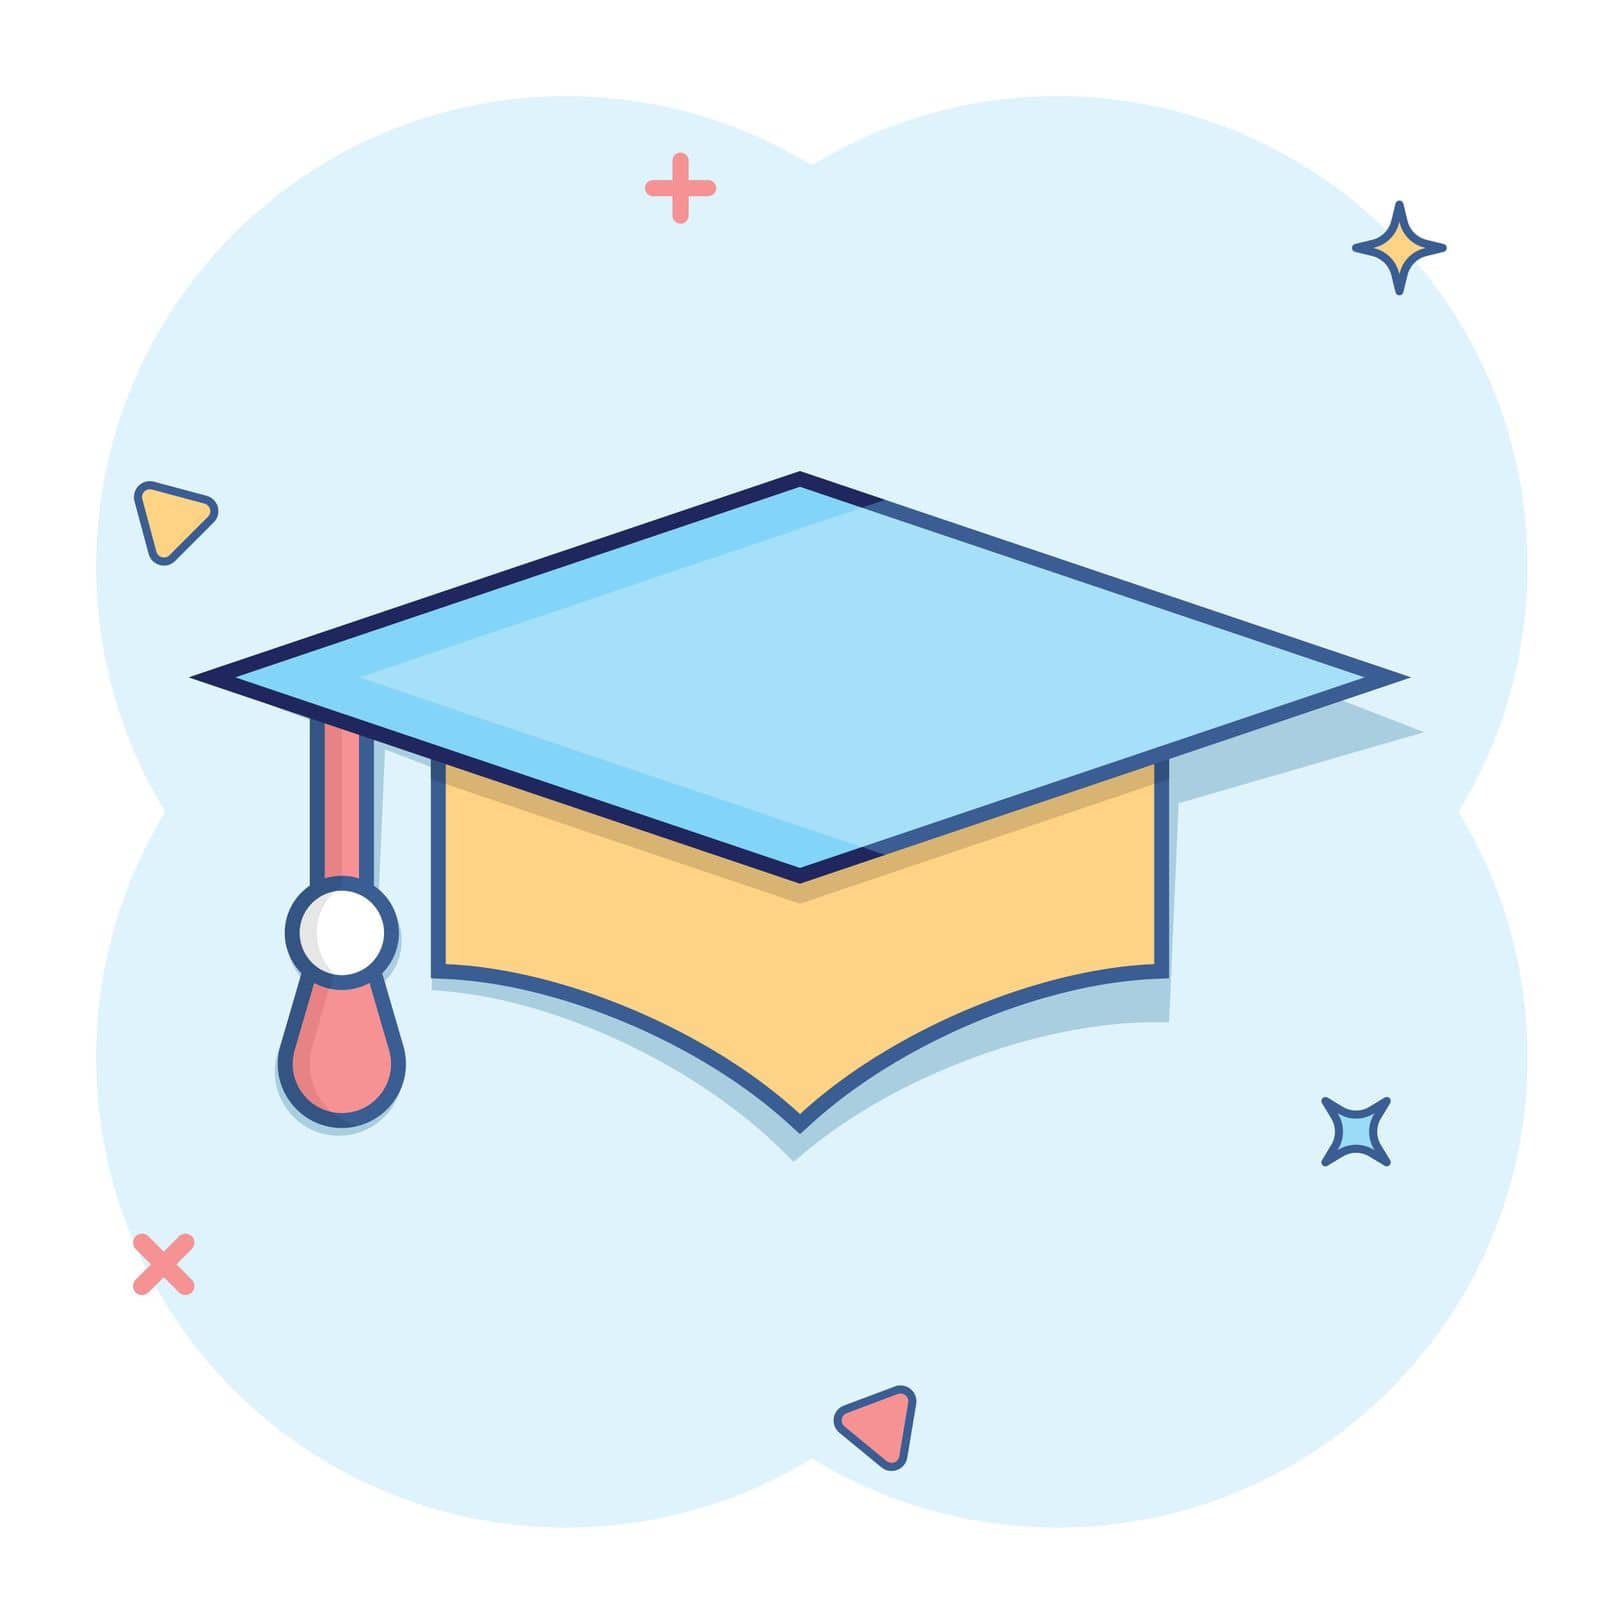 Graduation hat icon in comic style. Student cap cartoon vector illustration on white isolated background. University splash effect business concept. by LysenkoA